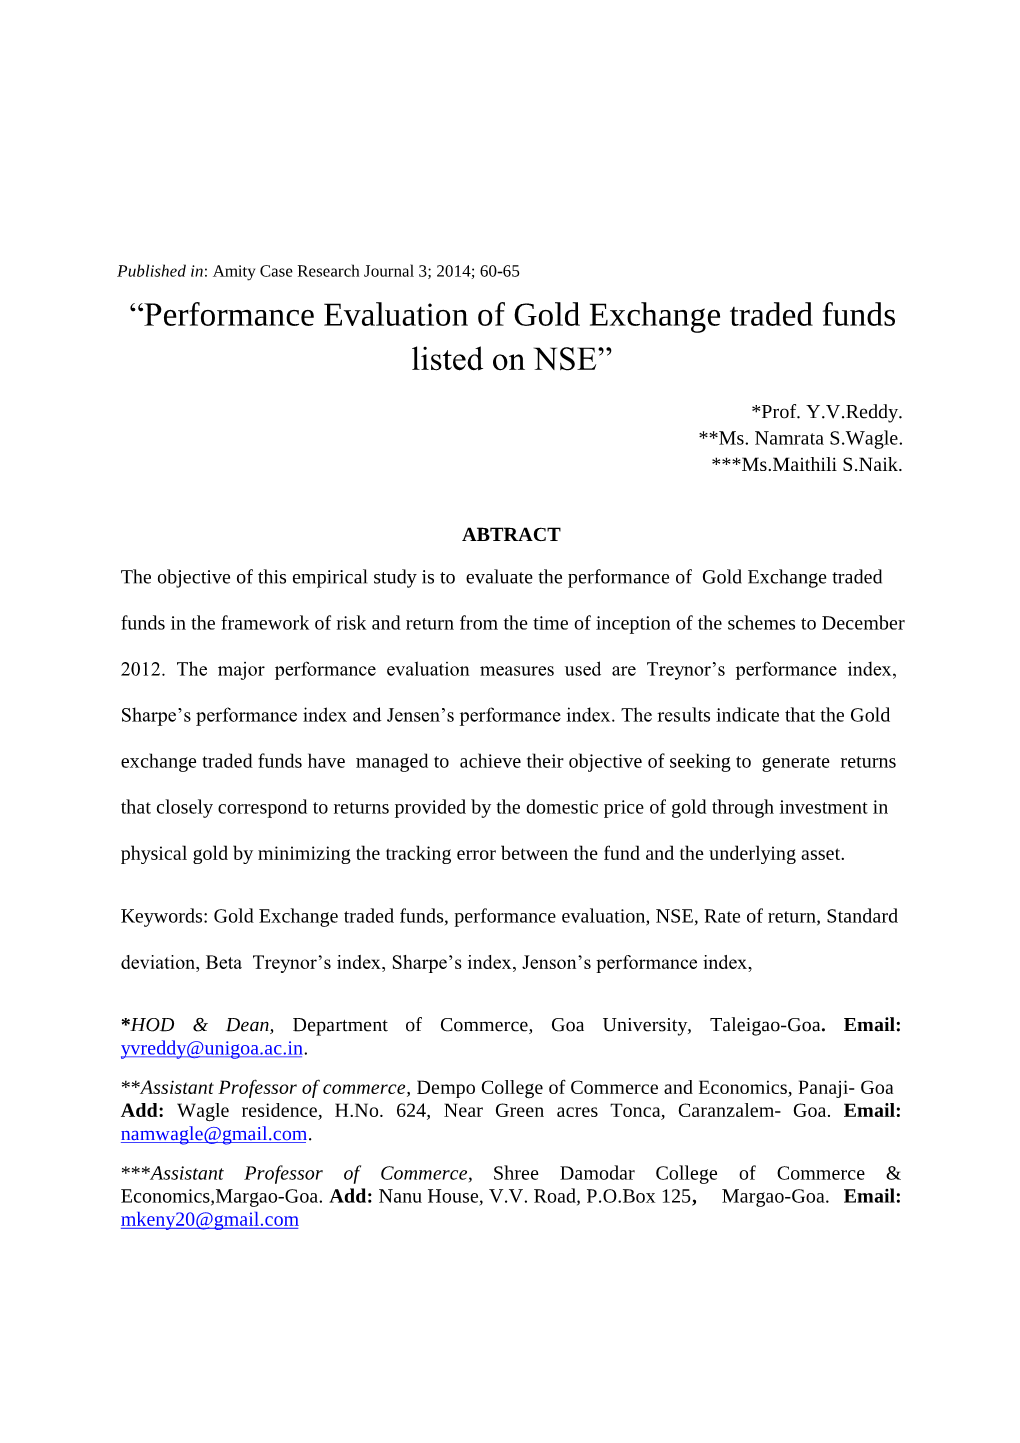 “Performance Evaluation of Gold Exchange Traded Funds Listed on NSE”